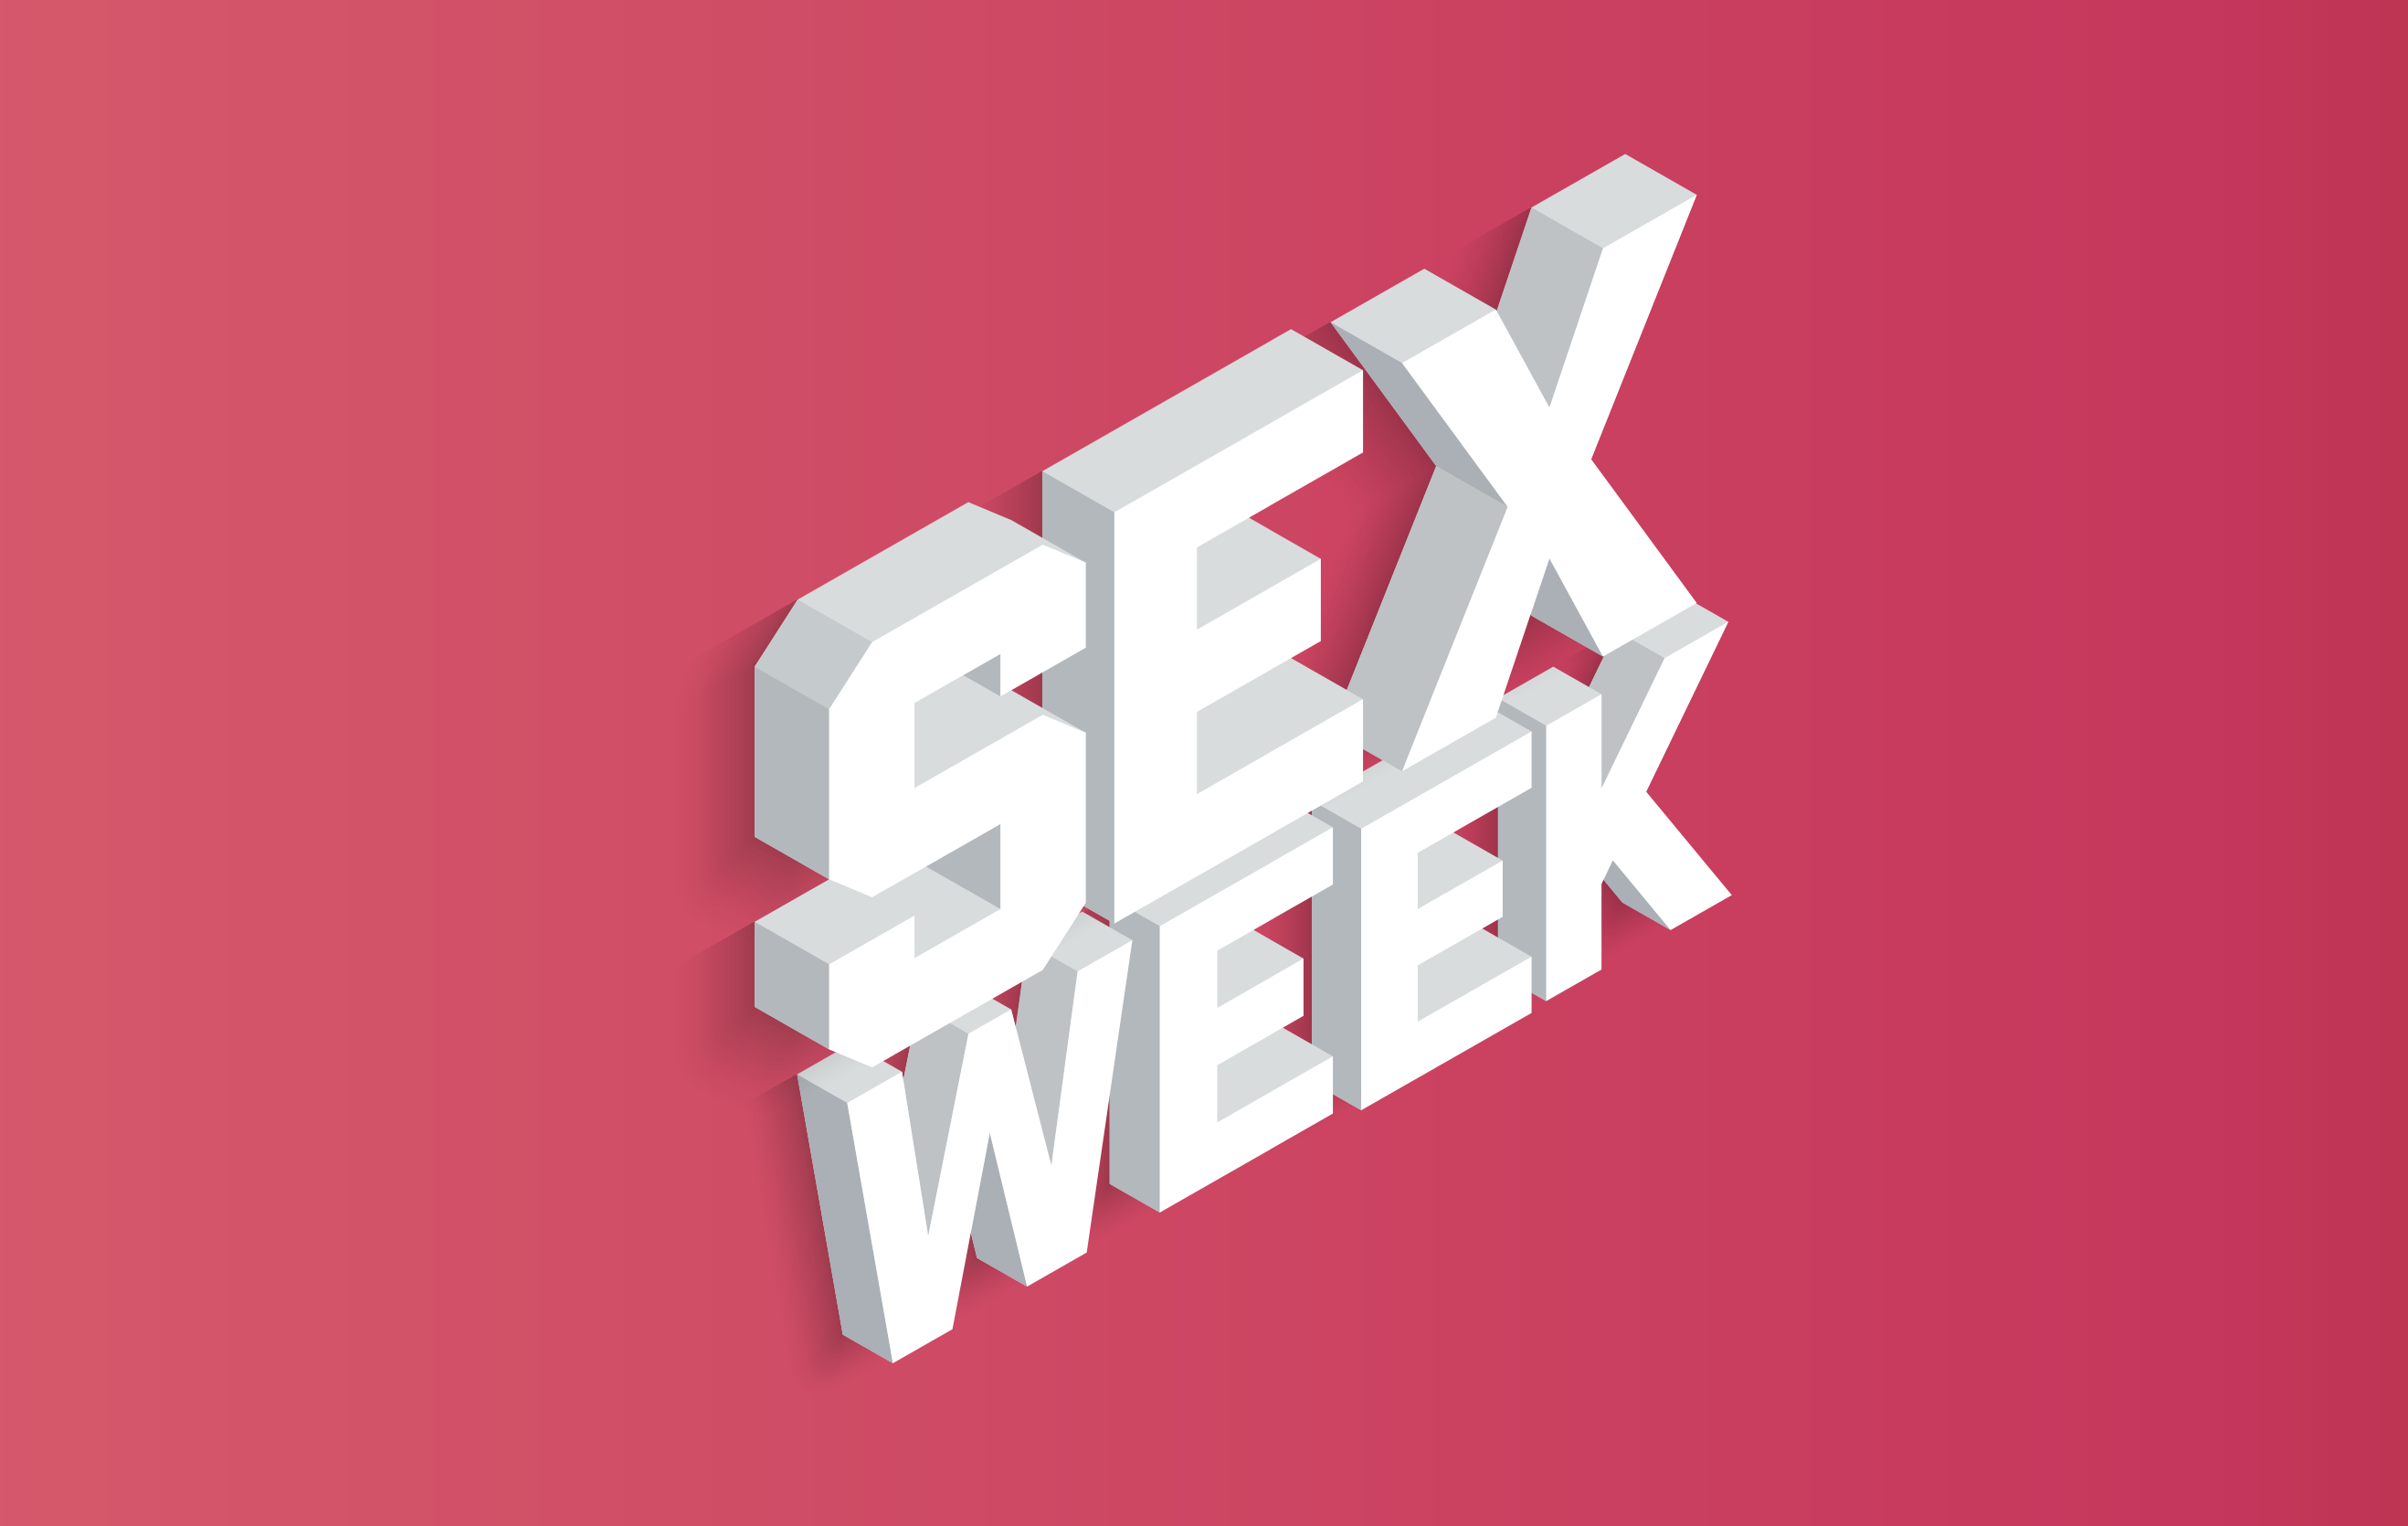 Sex Week logo: White block text that reads "Sex Week" over a red and pink background